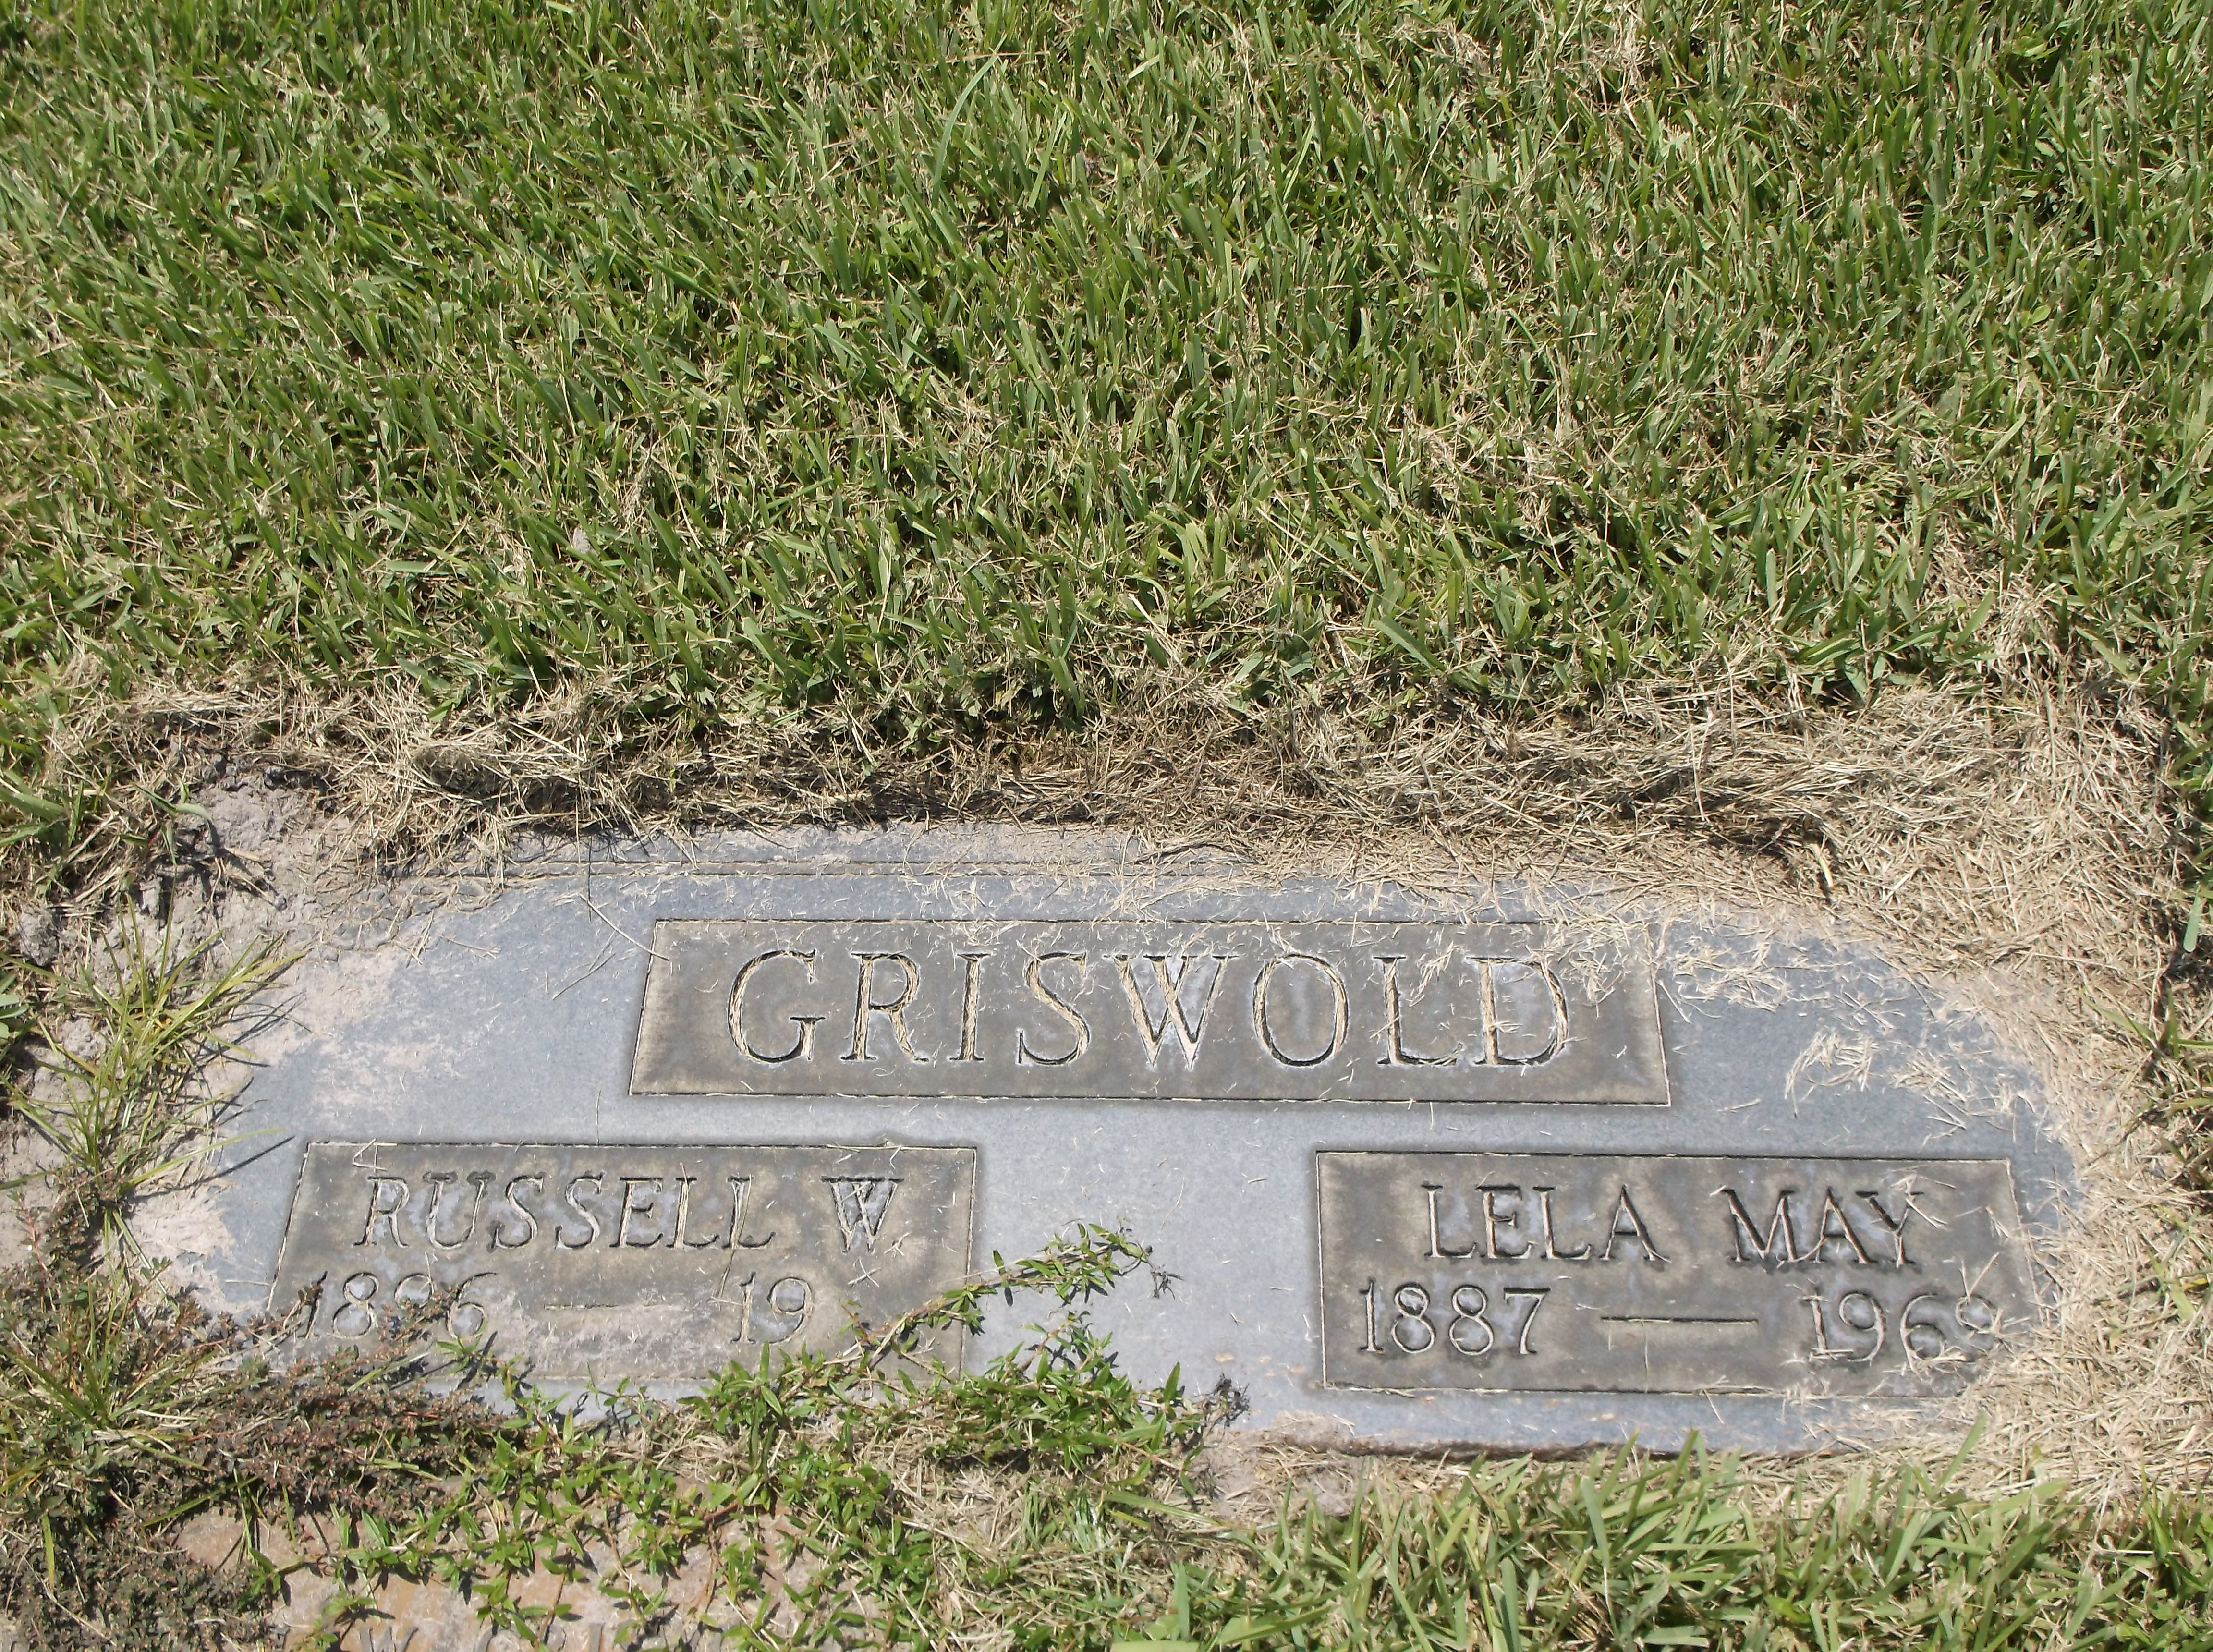 Russell W Griswold